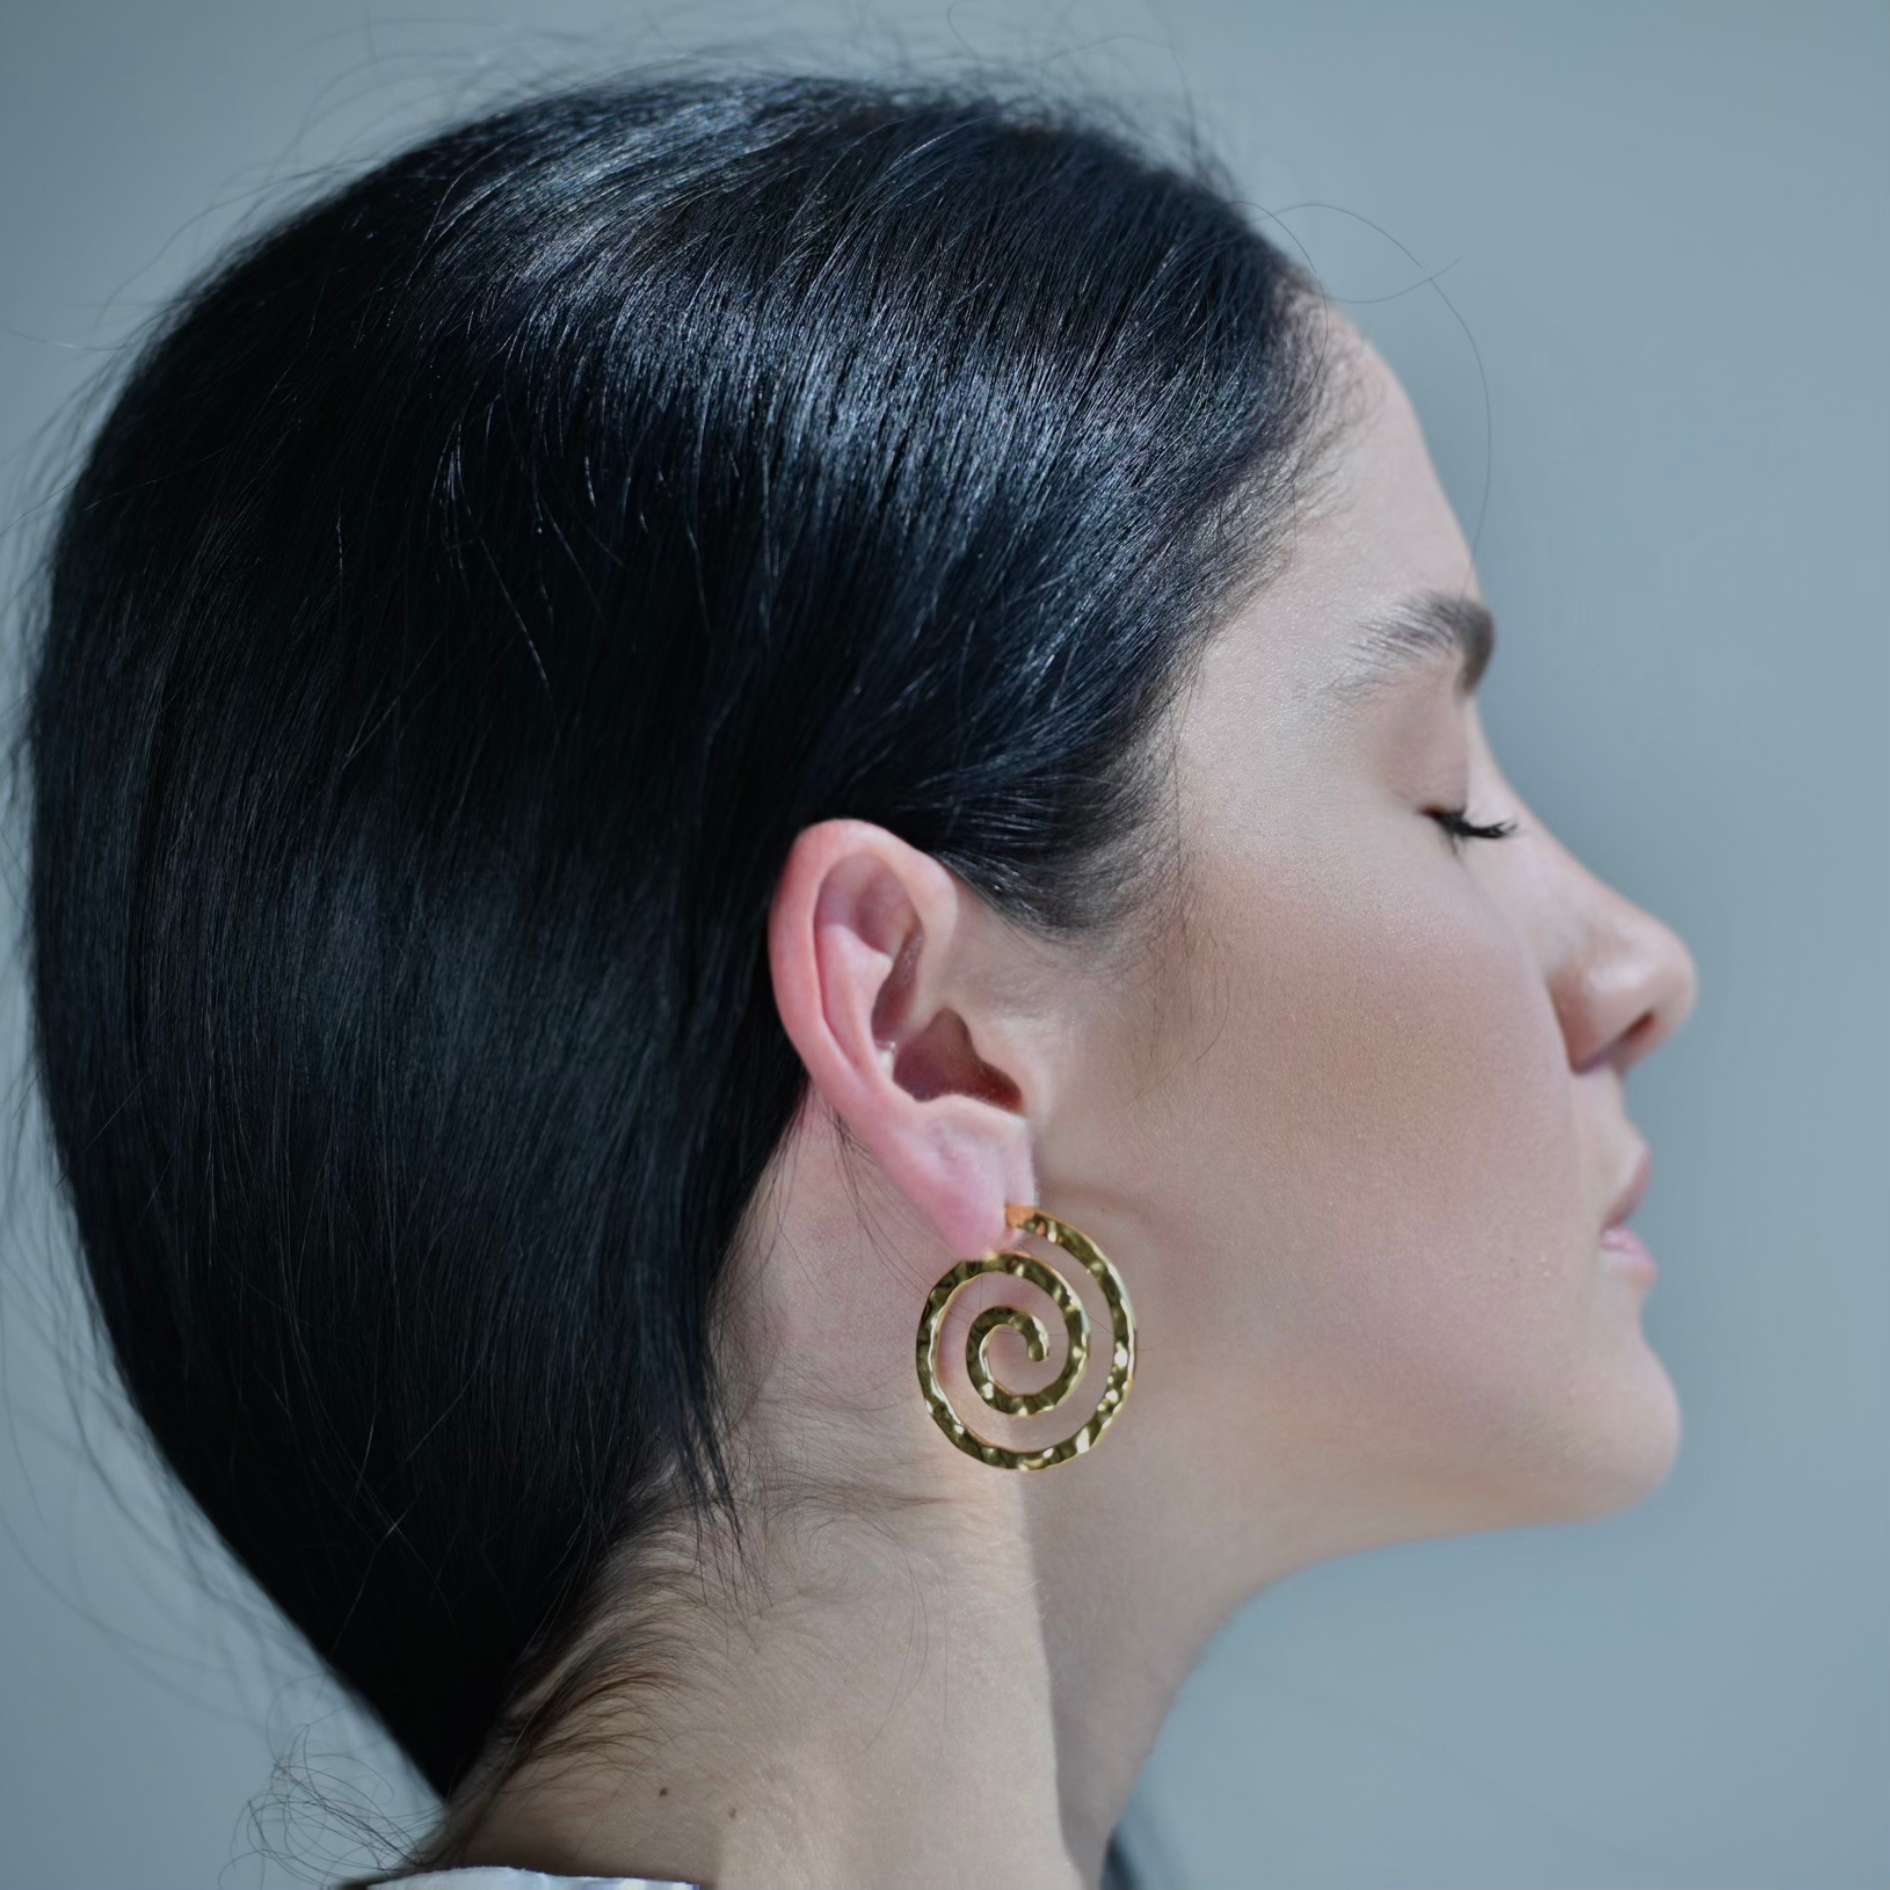 Gold plated hoop earrings with the shape of a spiral. The surface testure is irregular.